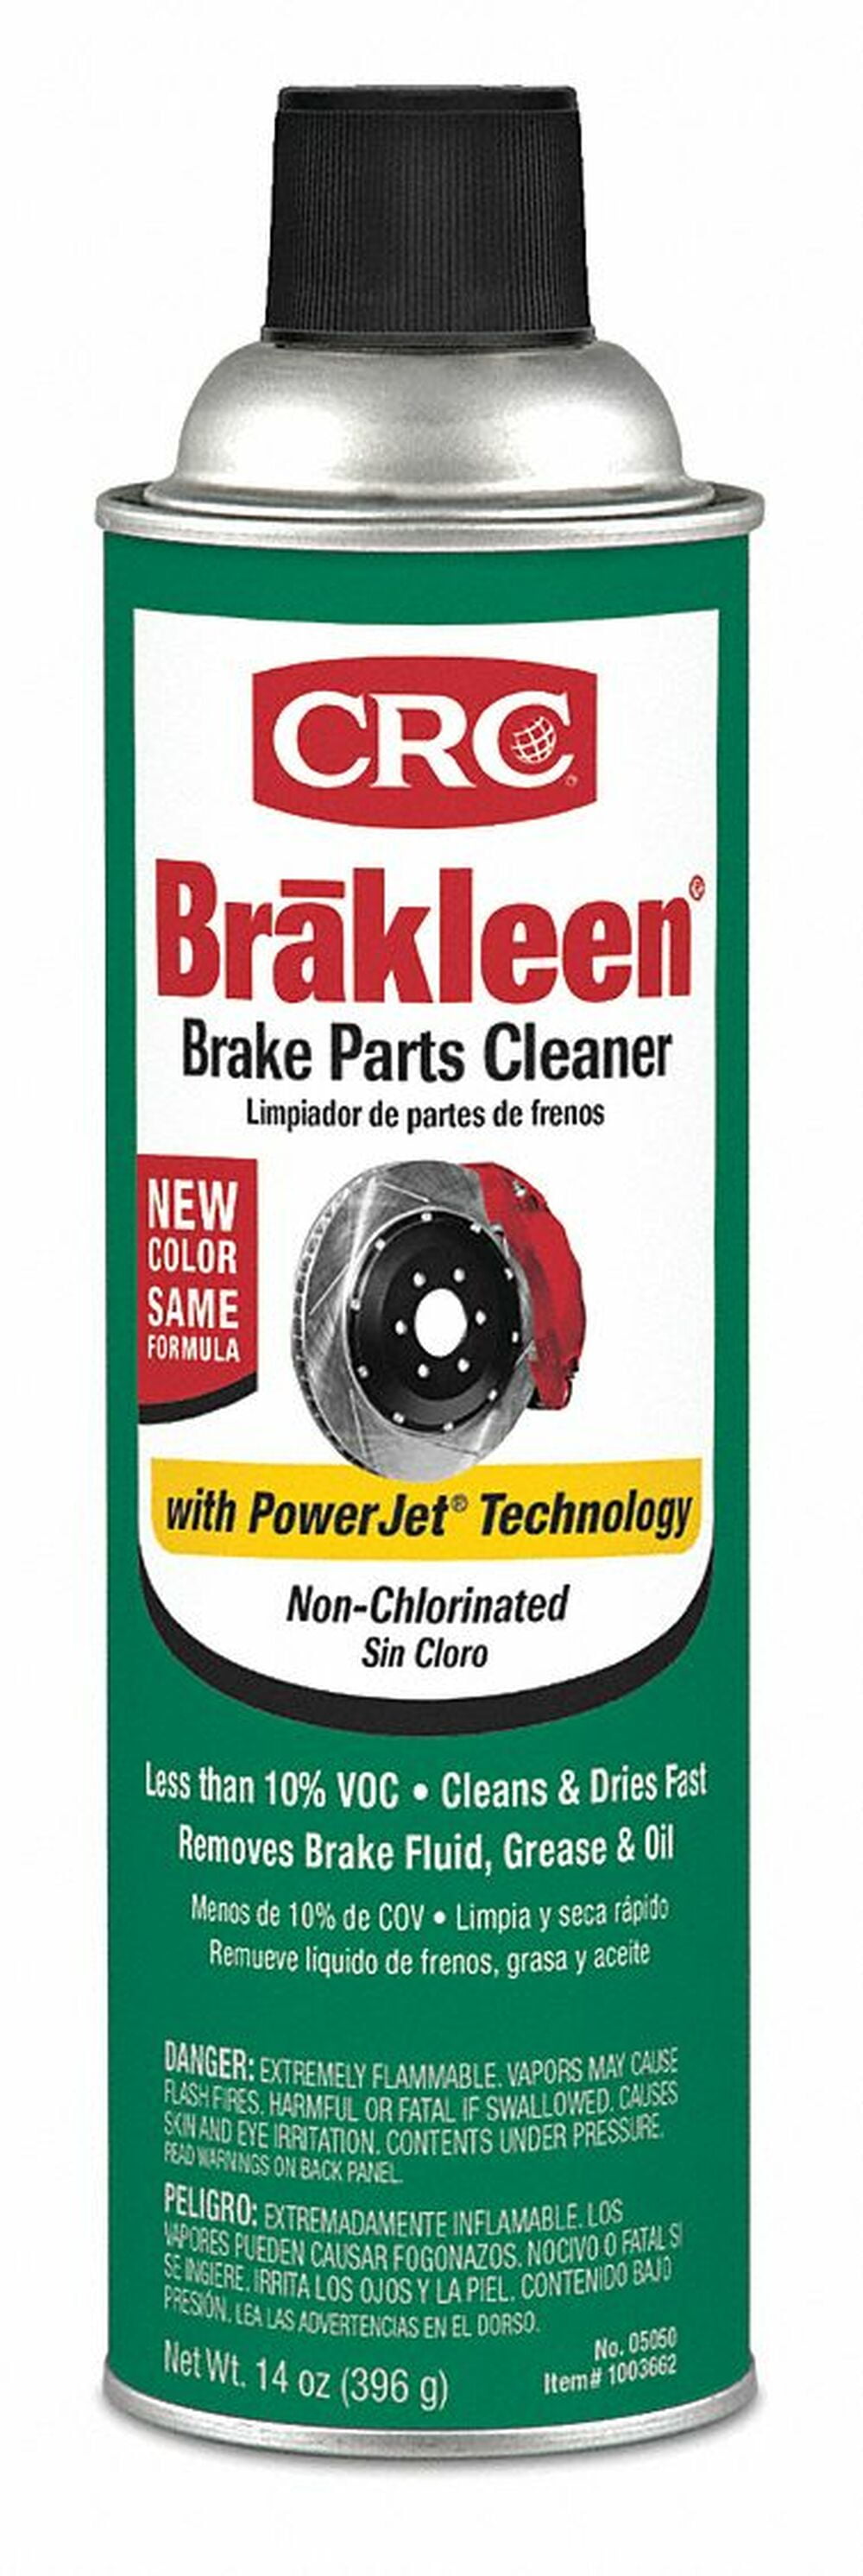 Gunk Pro Series Brake Parts Cleaner - Midwest Technology Products